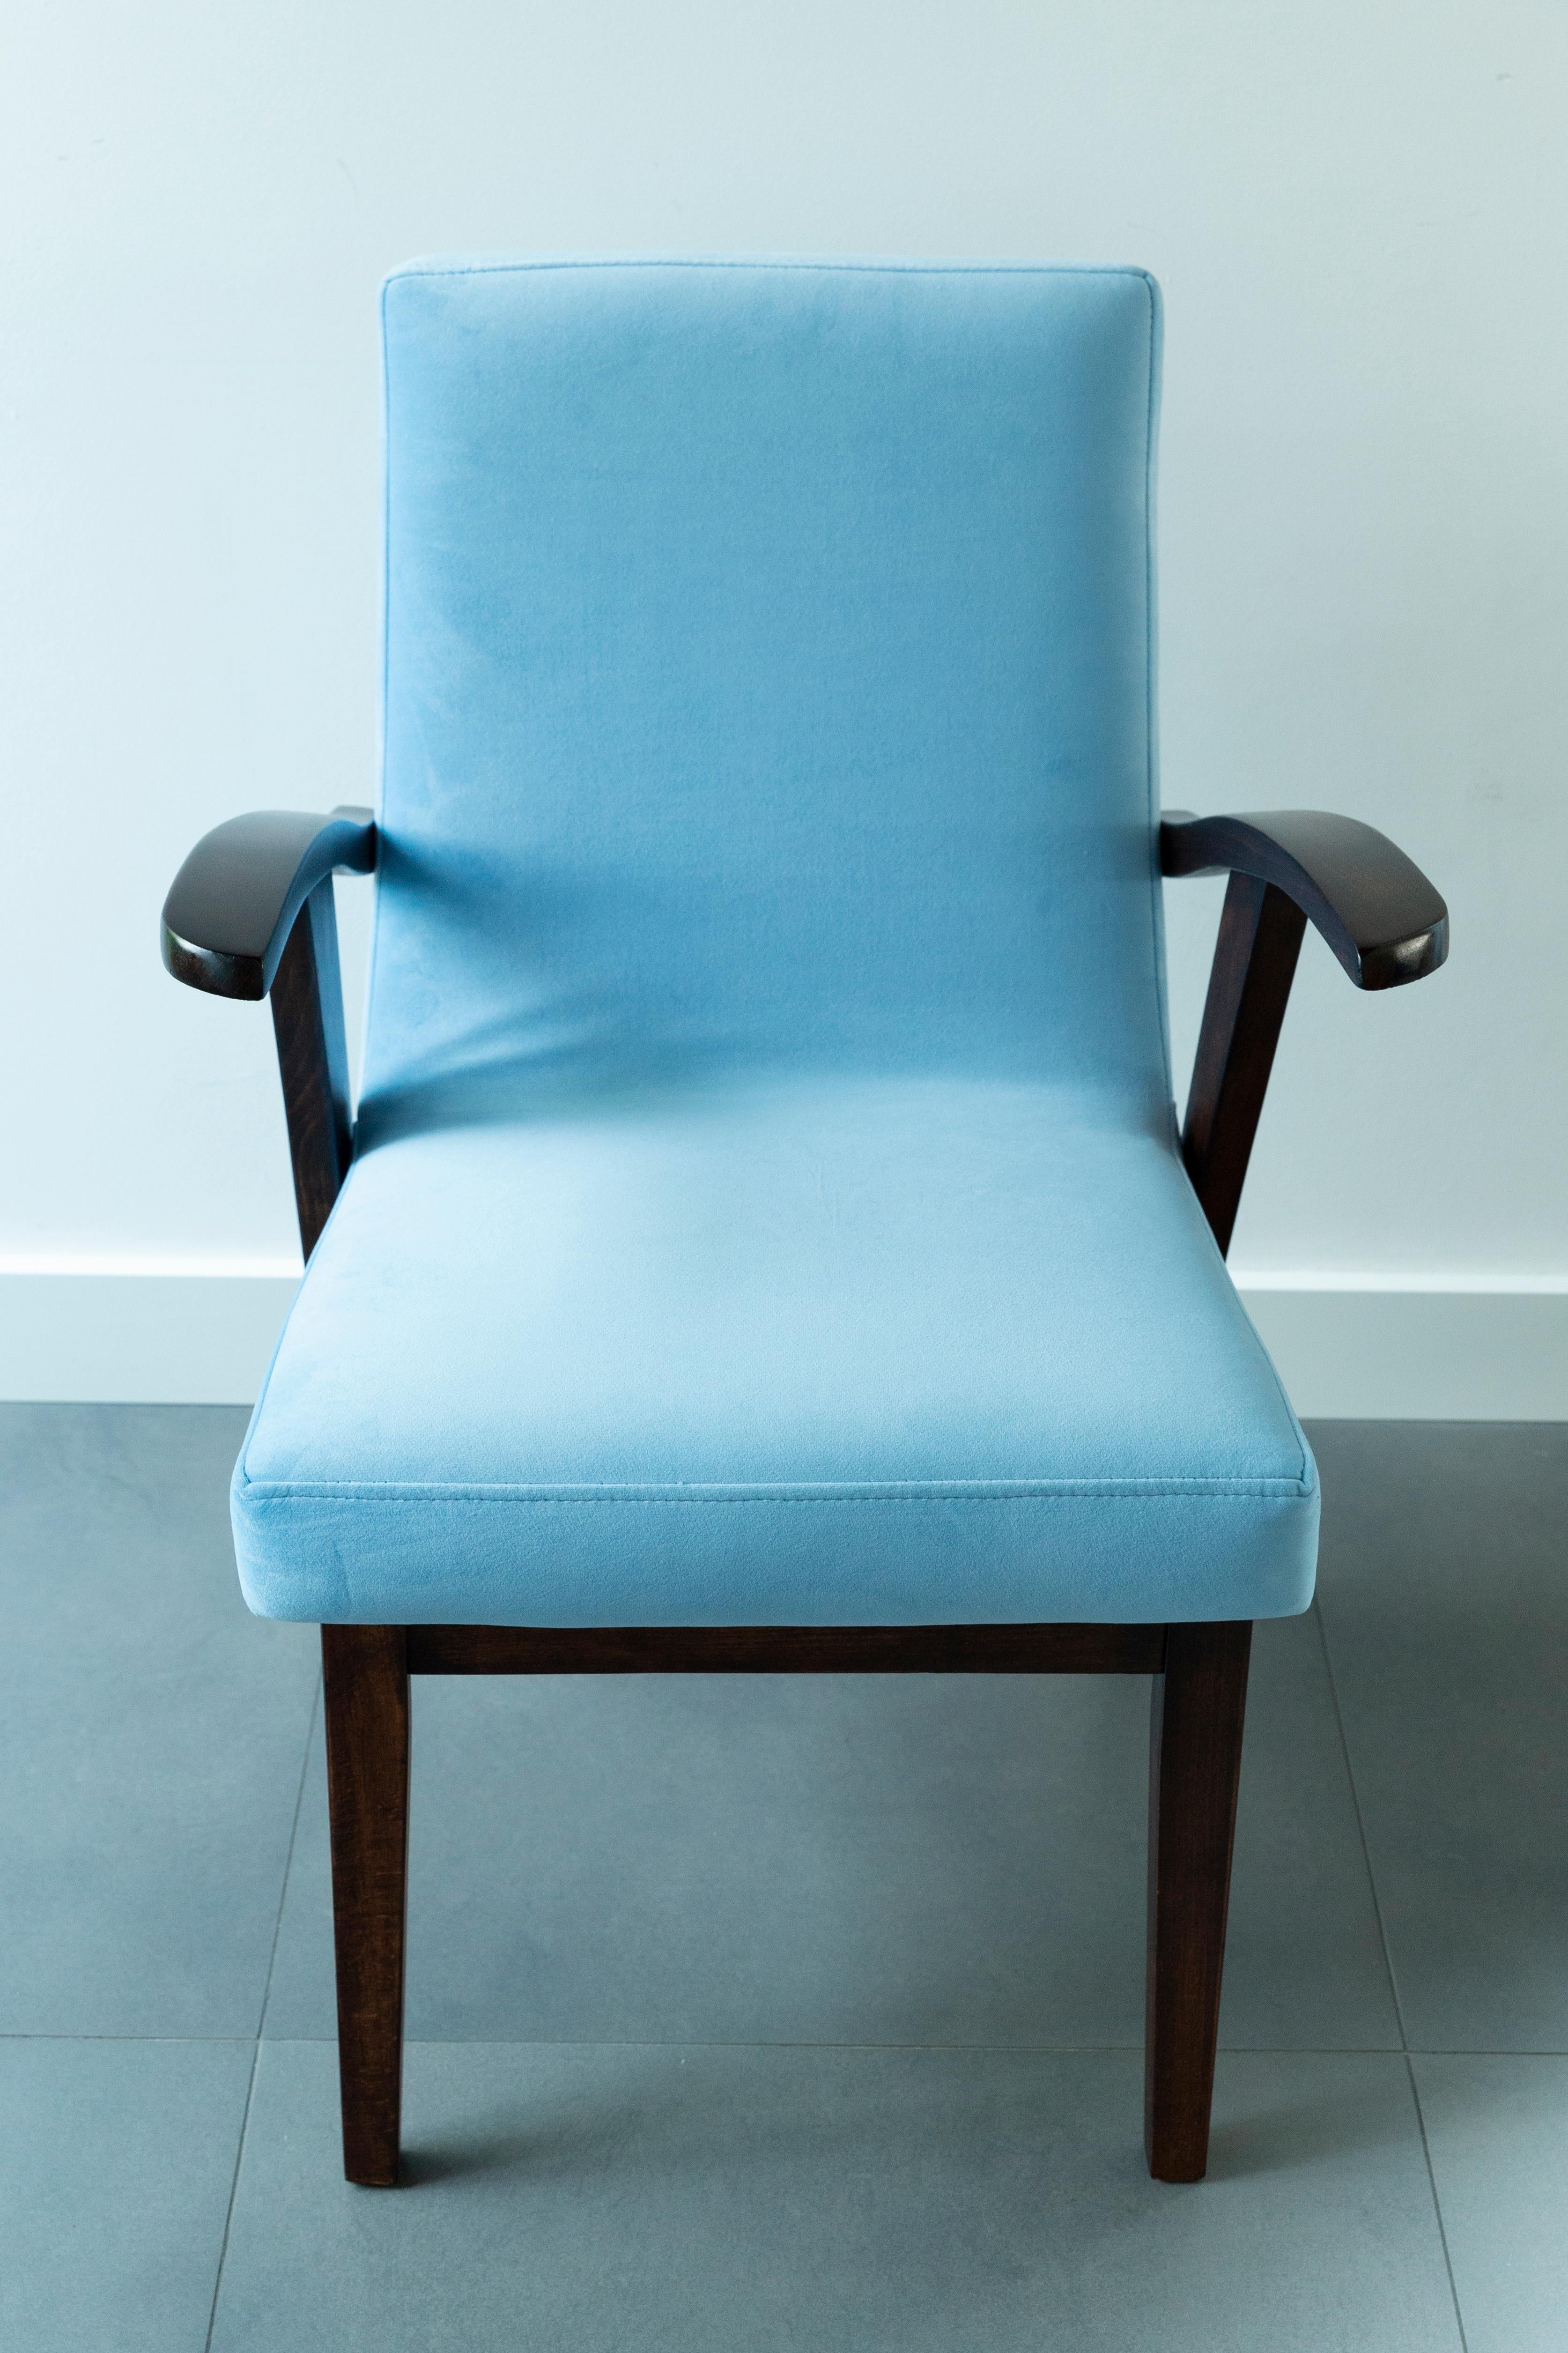 Set of Six 20th Century Armchairs in Baby Blue Velvet, Mieczyslaw Puchala, 1960s For Sale 3